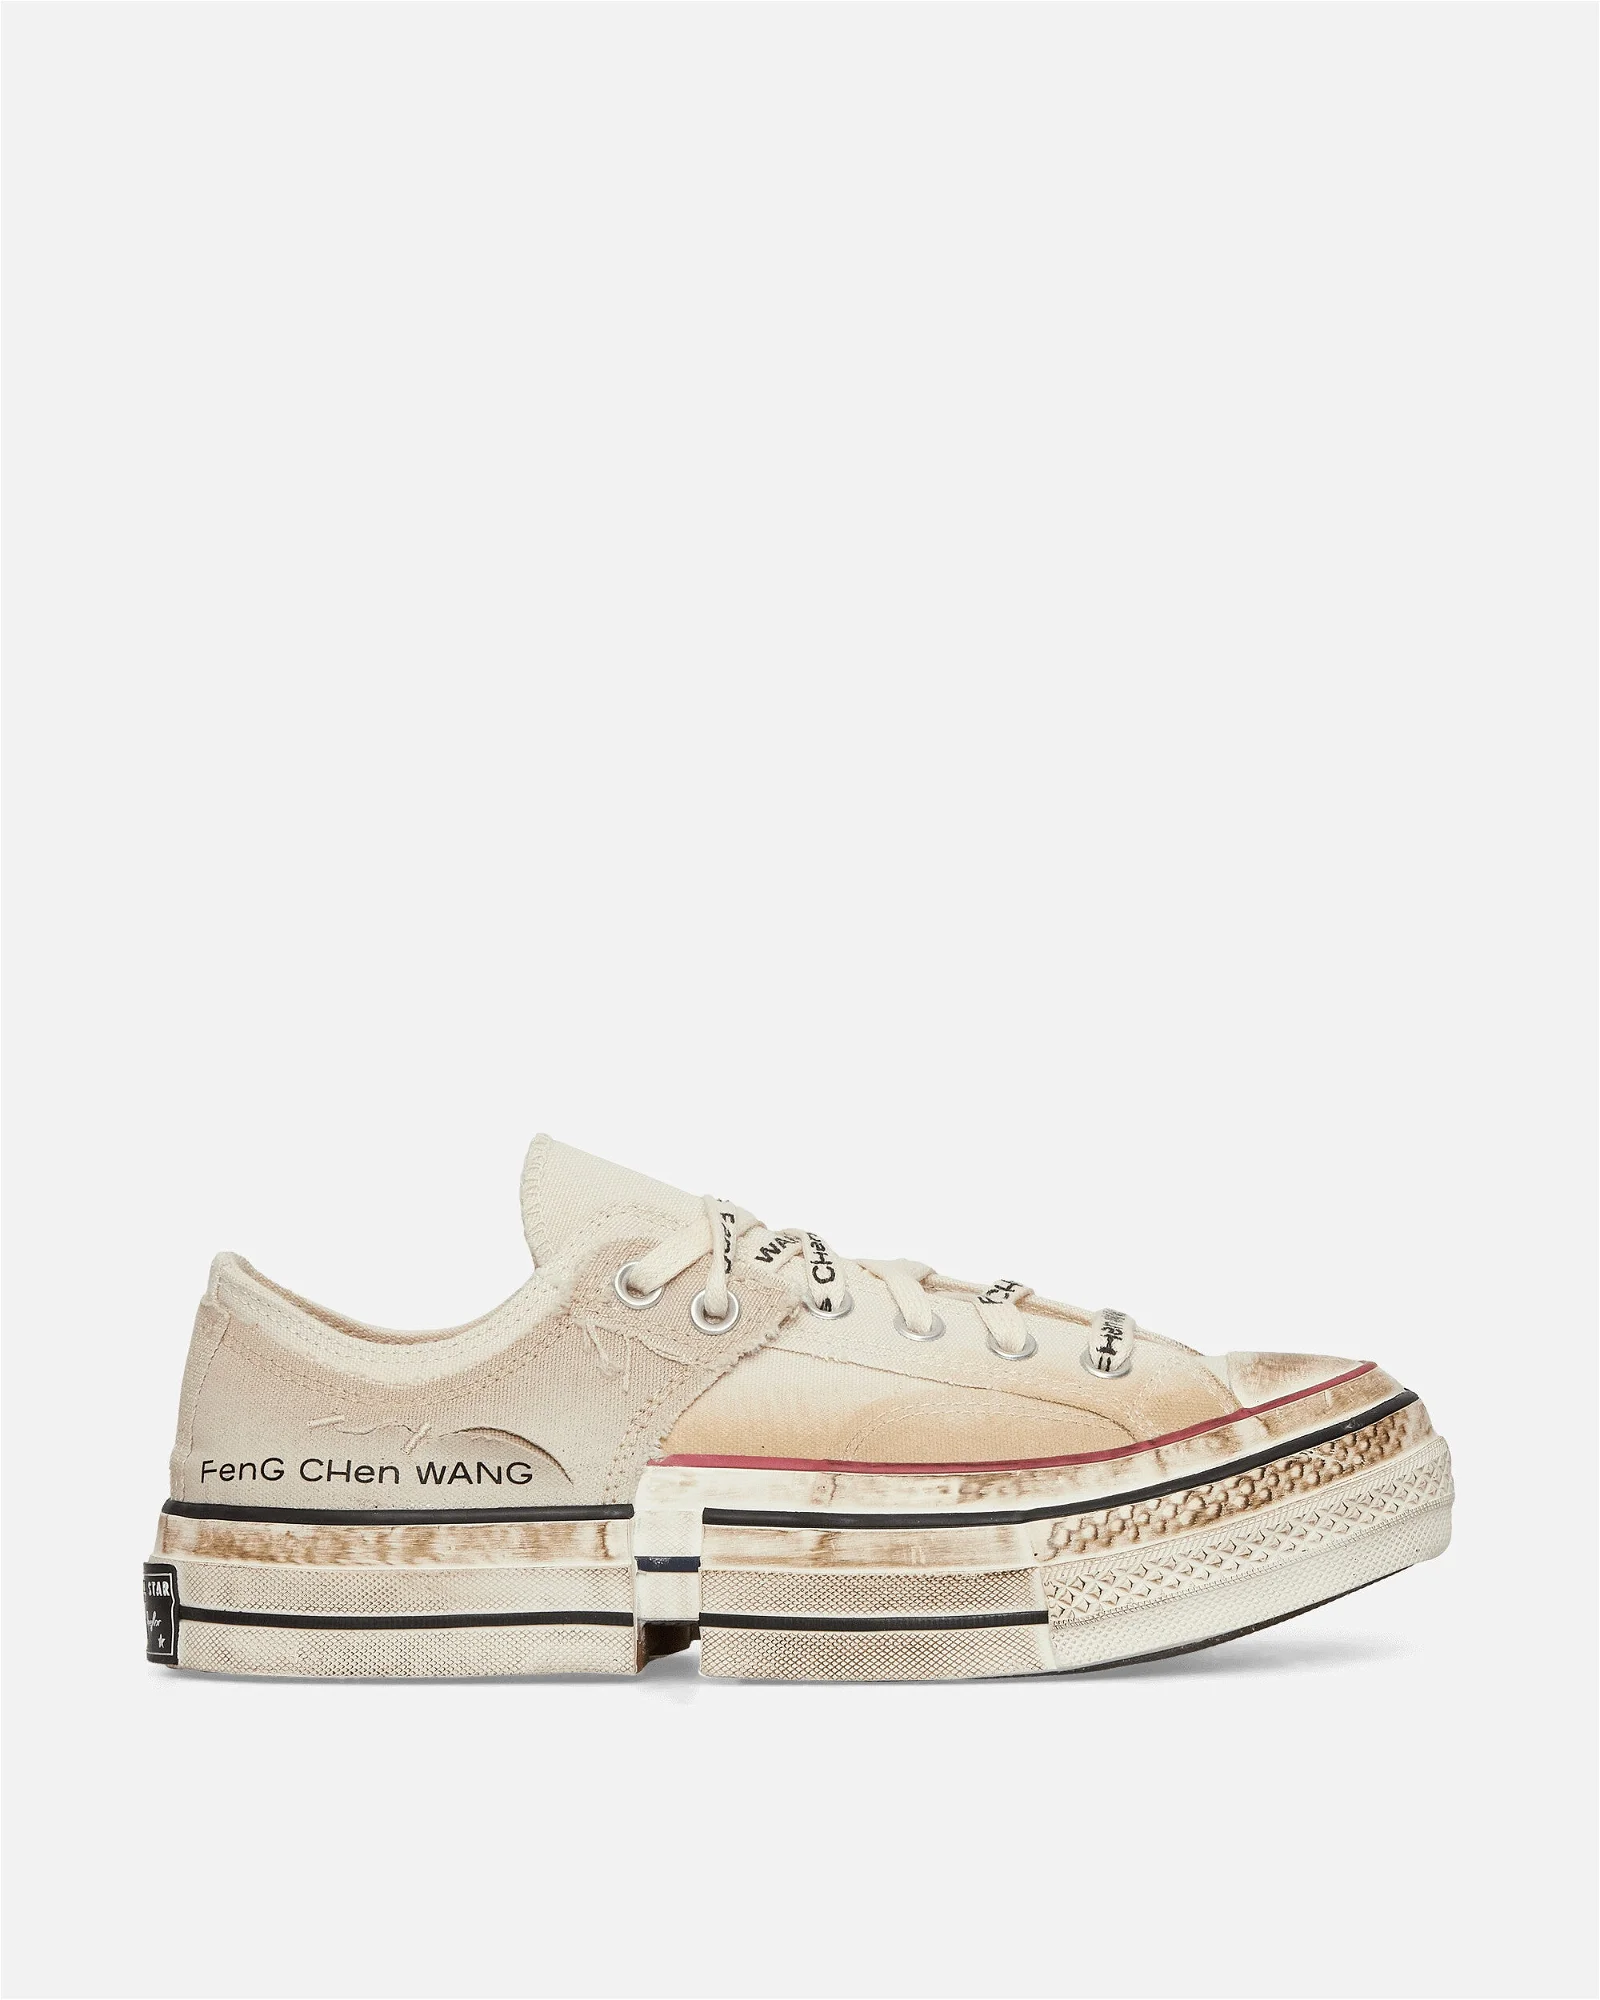 Feng Chen Wang x Chuck 70 2-in-1 "Natural Ivory"